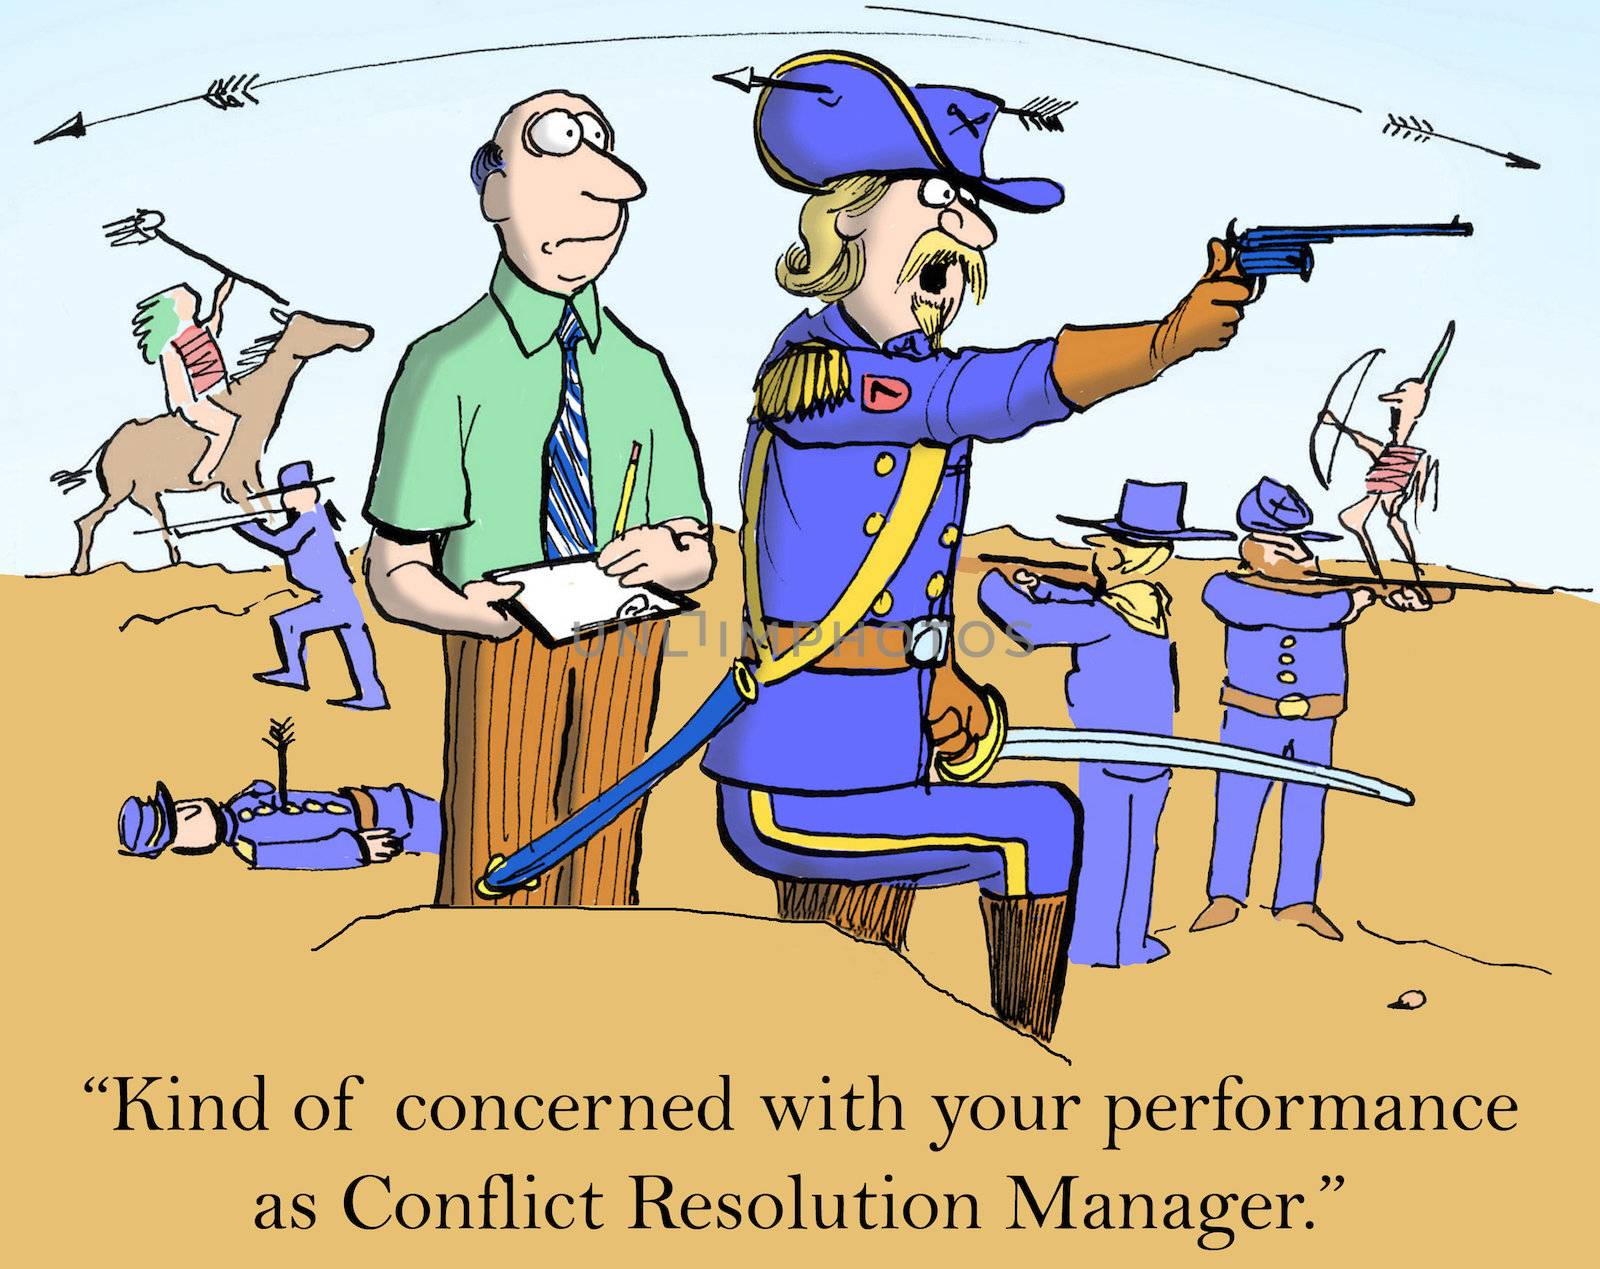 "Kind of concerned with your performance as Conflict Resolution Manager."